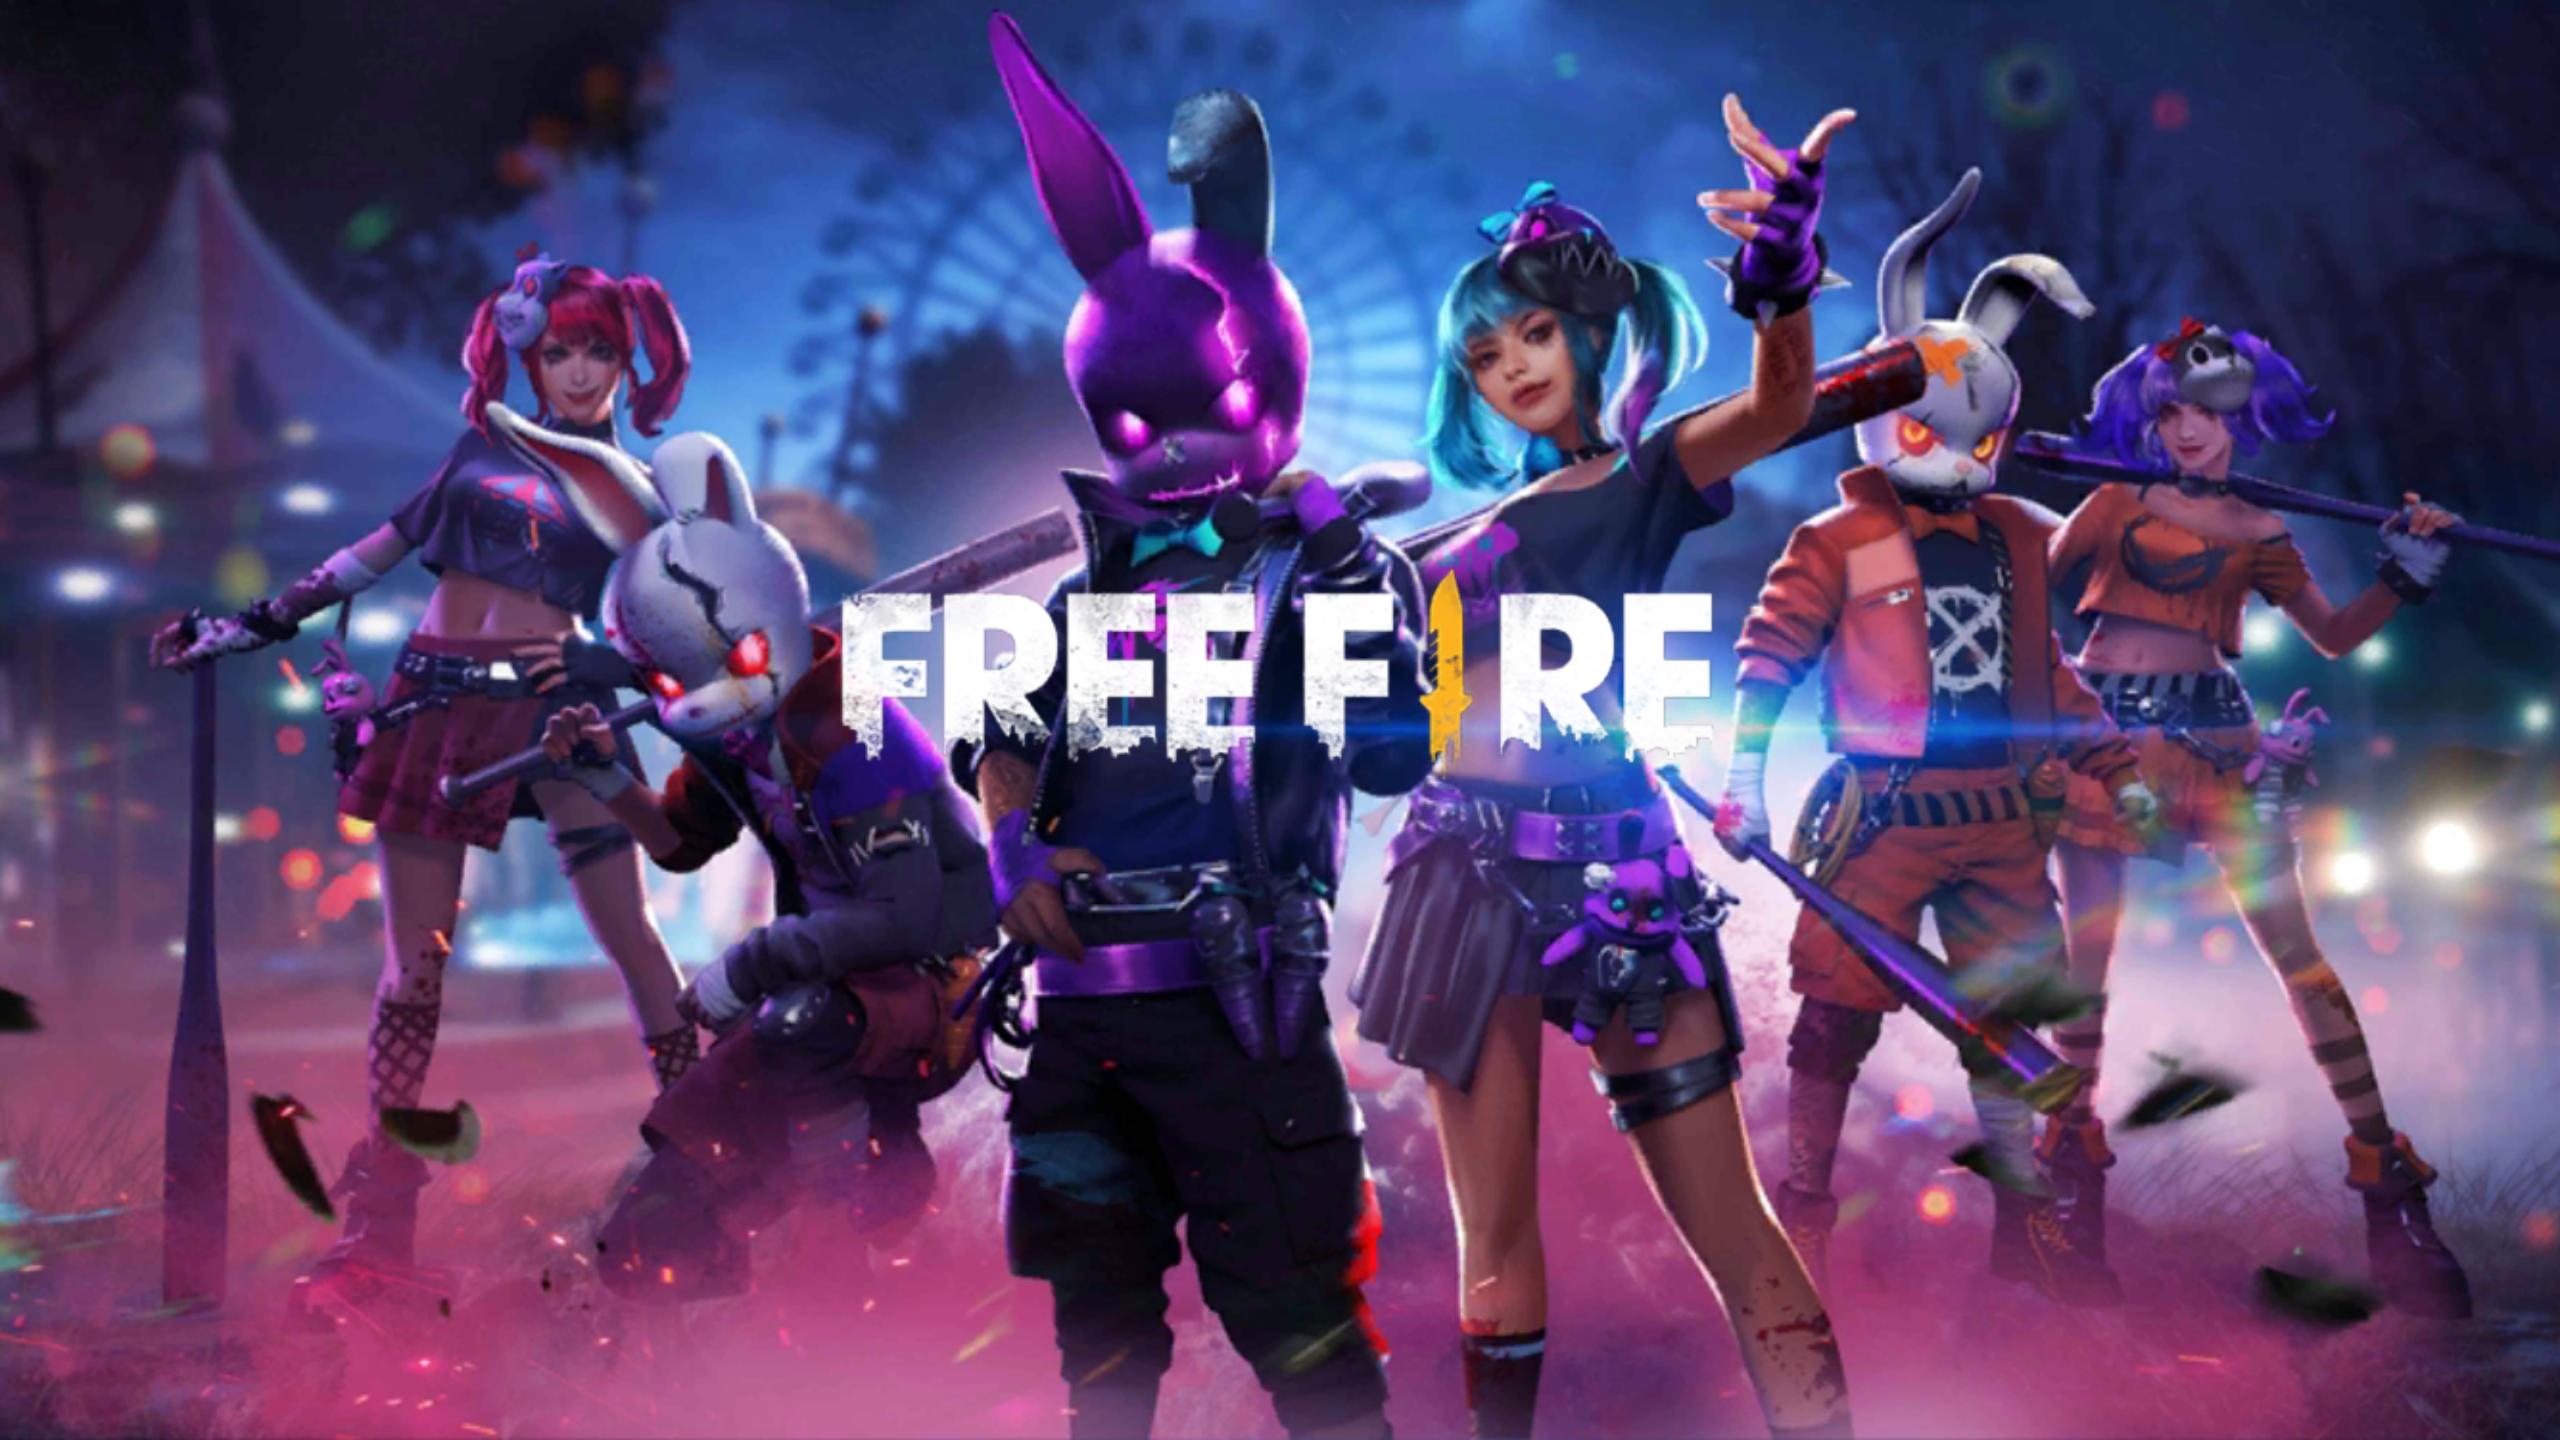 free fire images hd download 2020